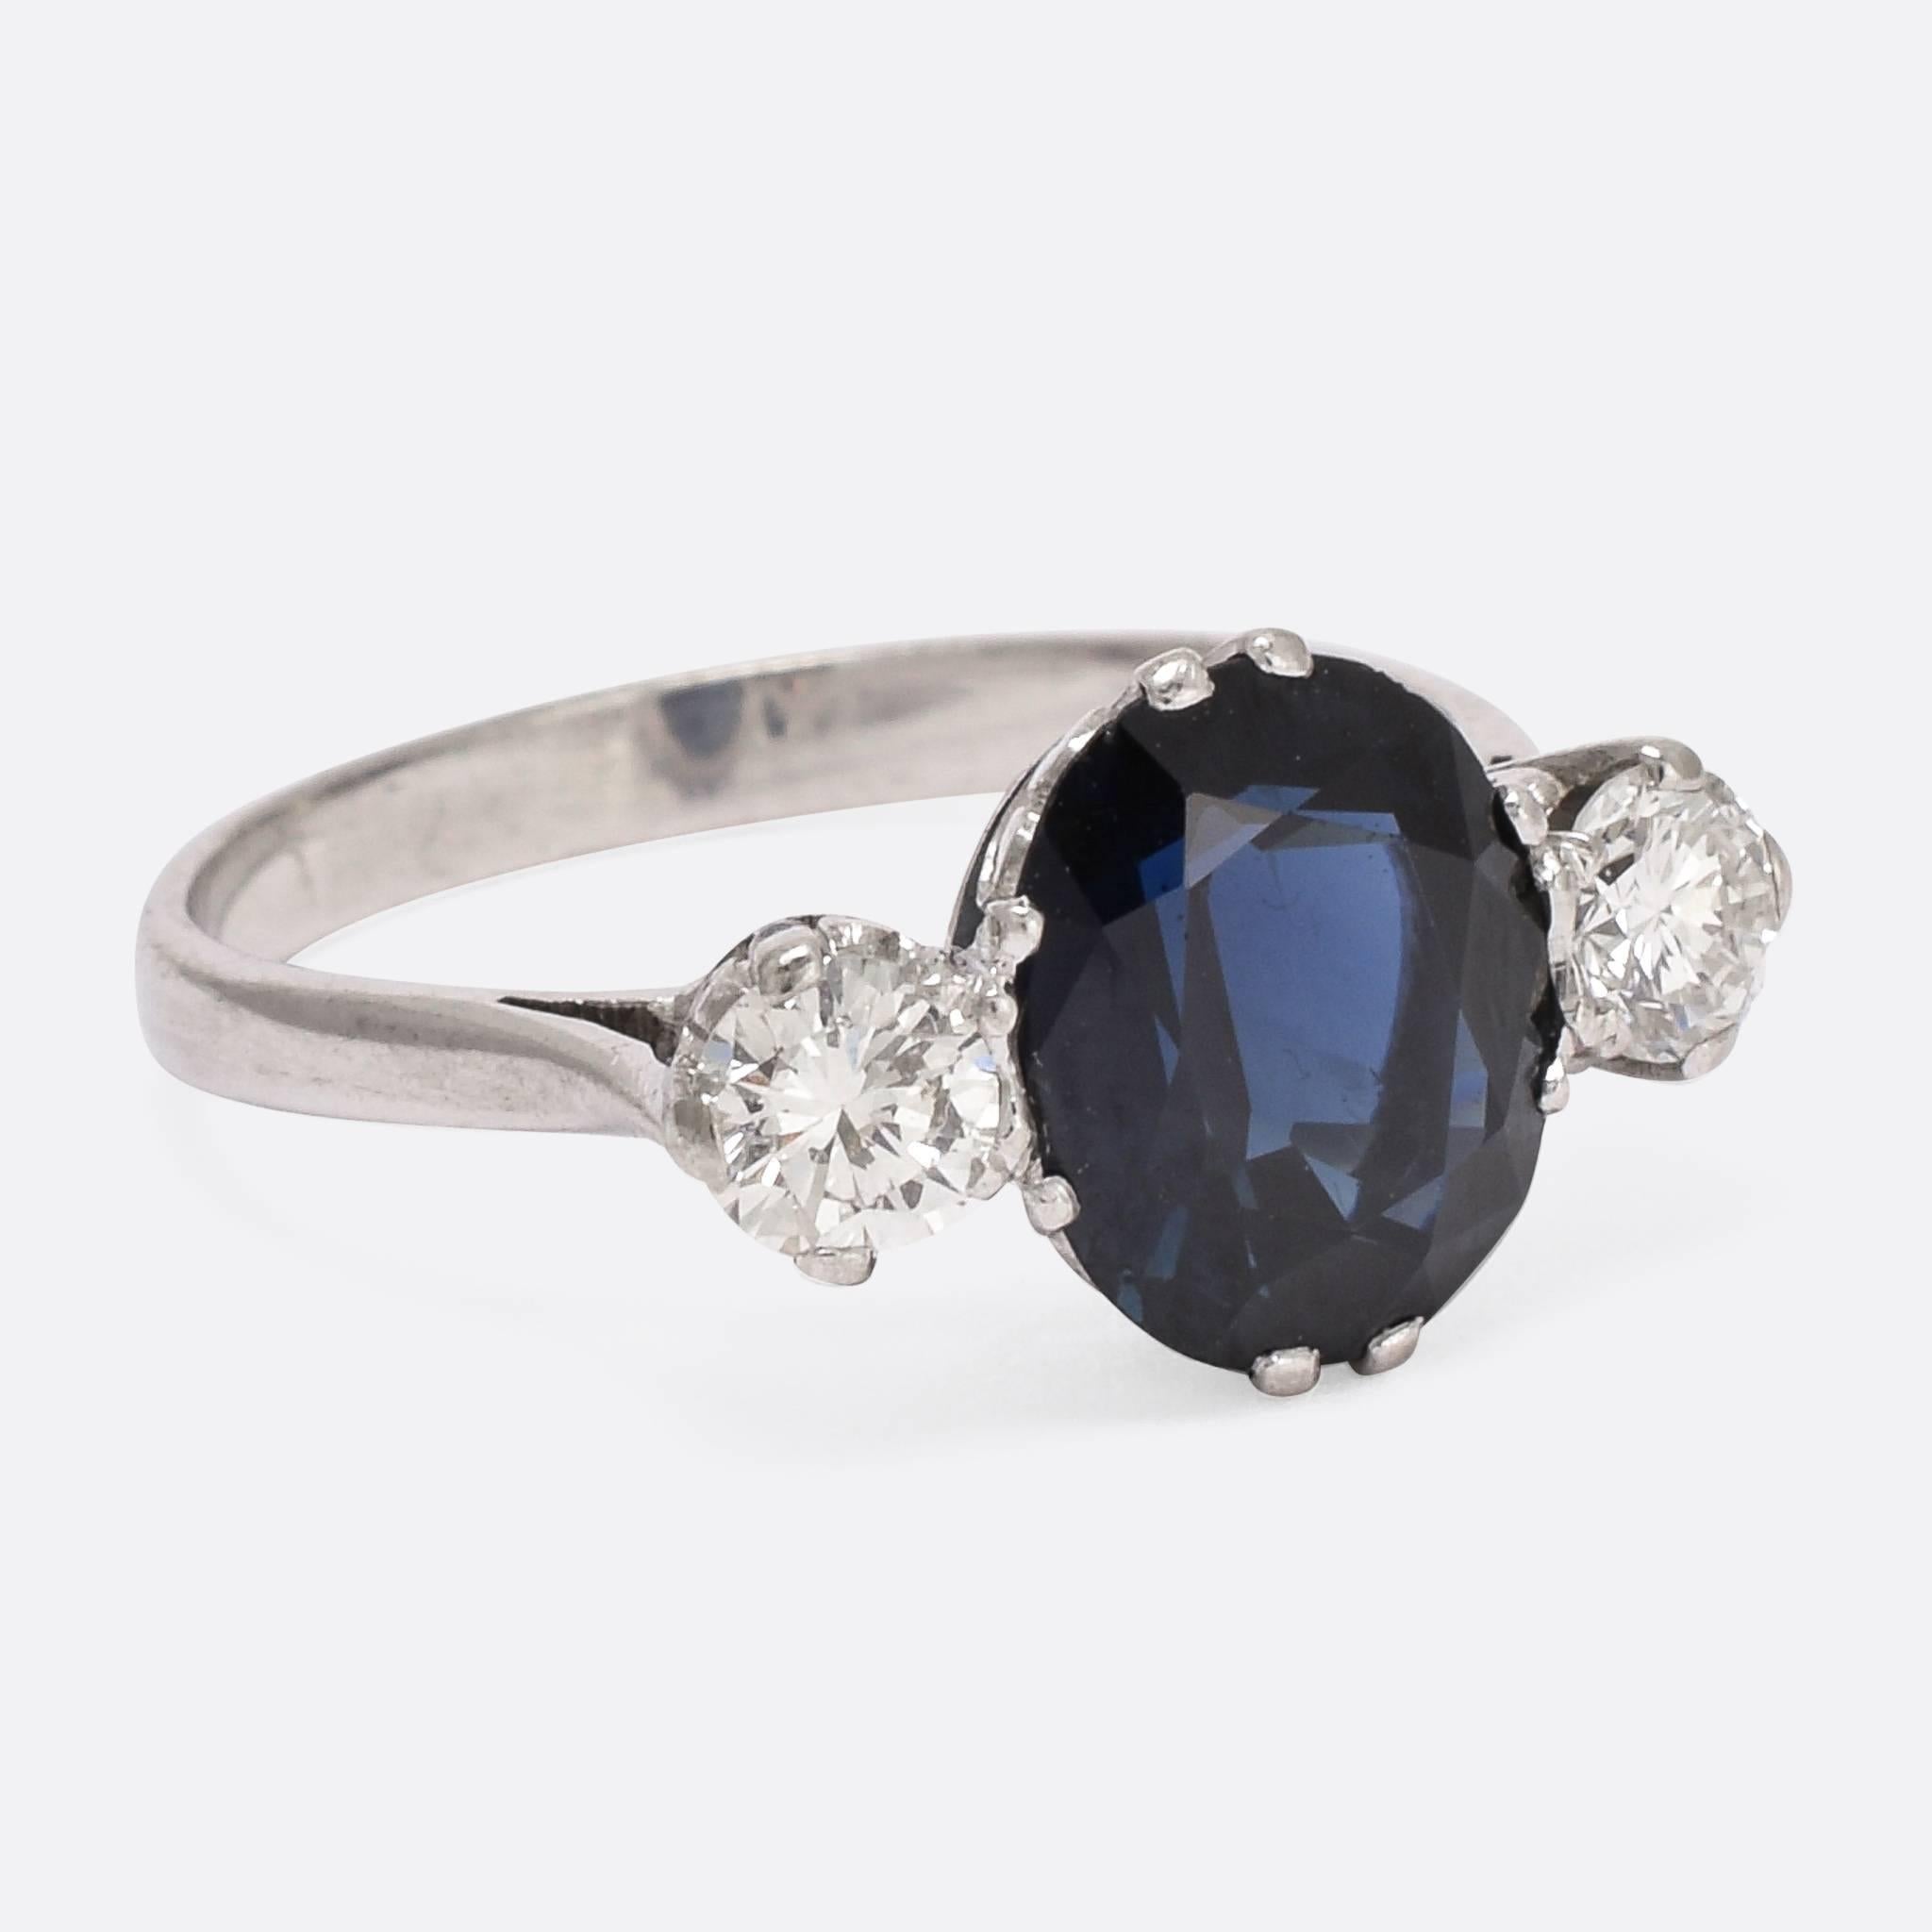 This gorgeous antique trilogy ring is set with a 2.5 carat central sapphire, flanked by two .24ct brilliant cut diamonds. Modelled in platinum, the stones are held by beautifully ornate claws, and the ring dates to c.1920. The three stones of a